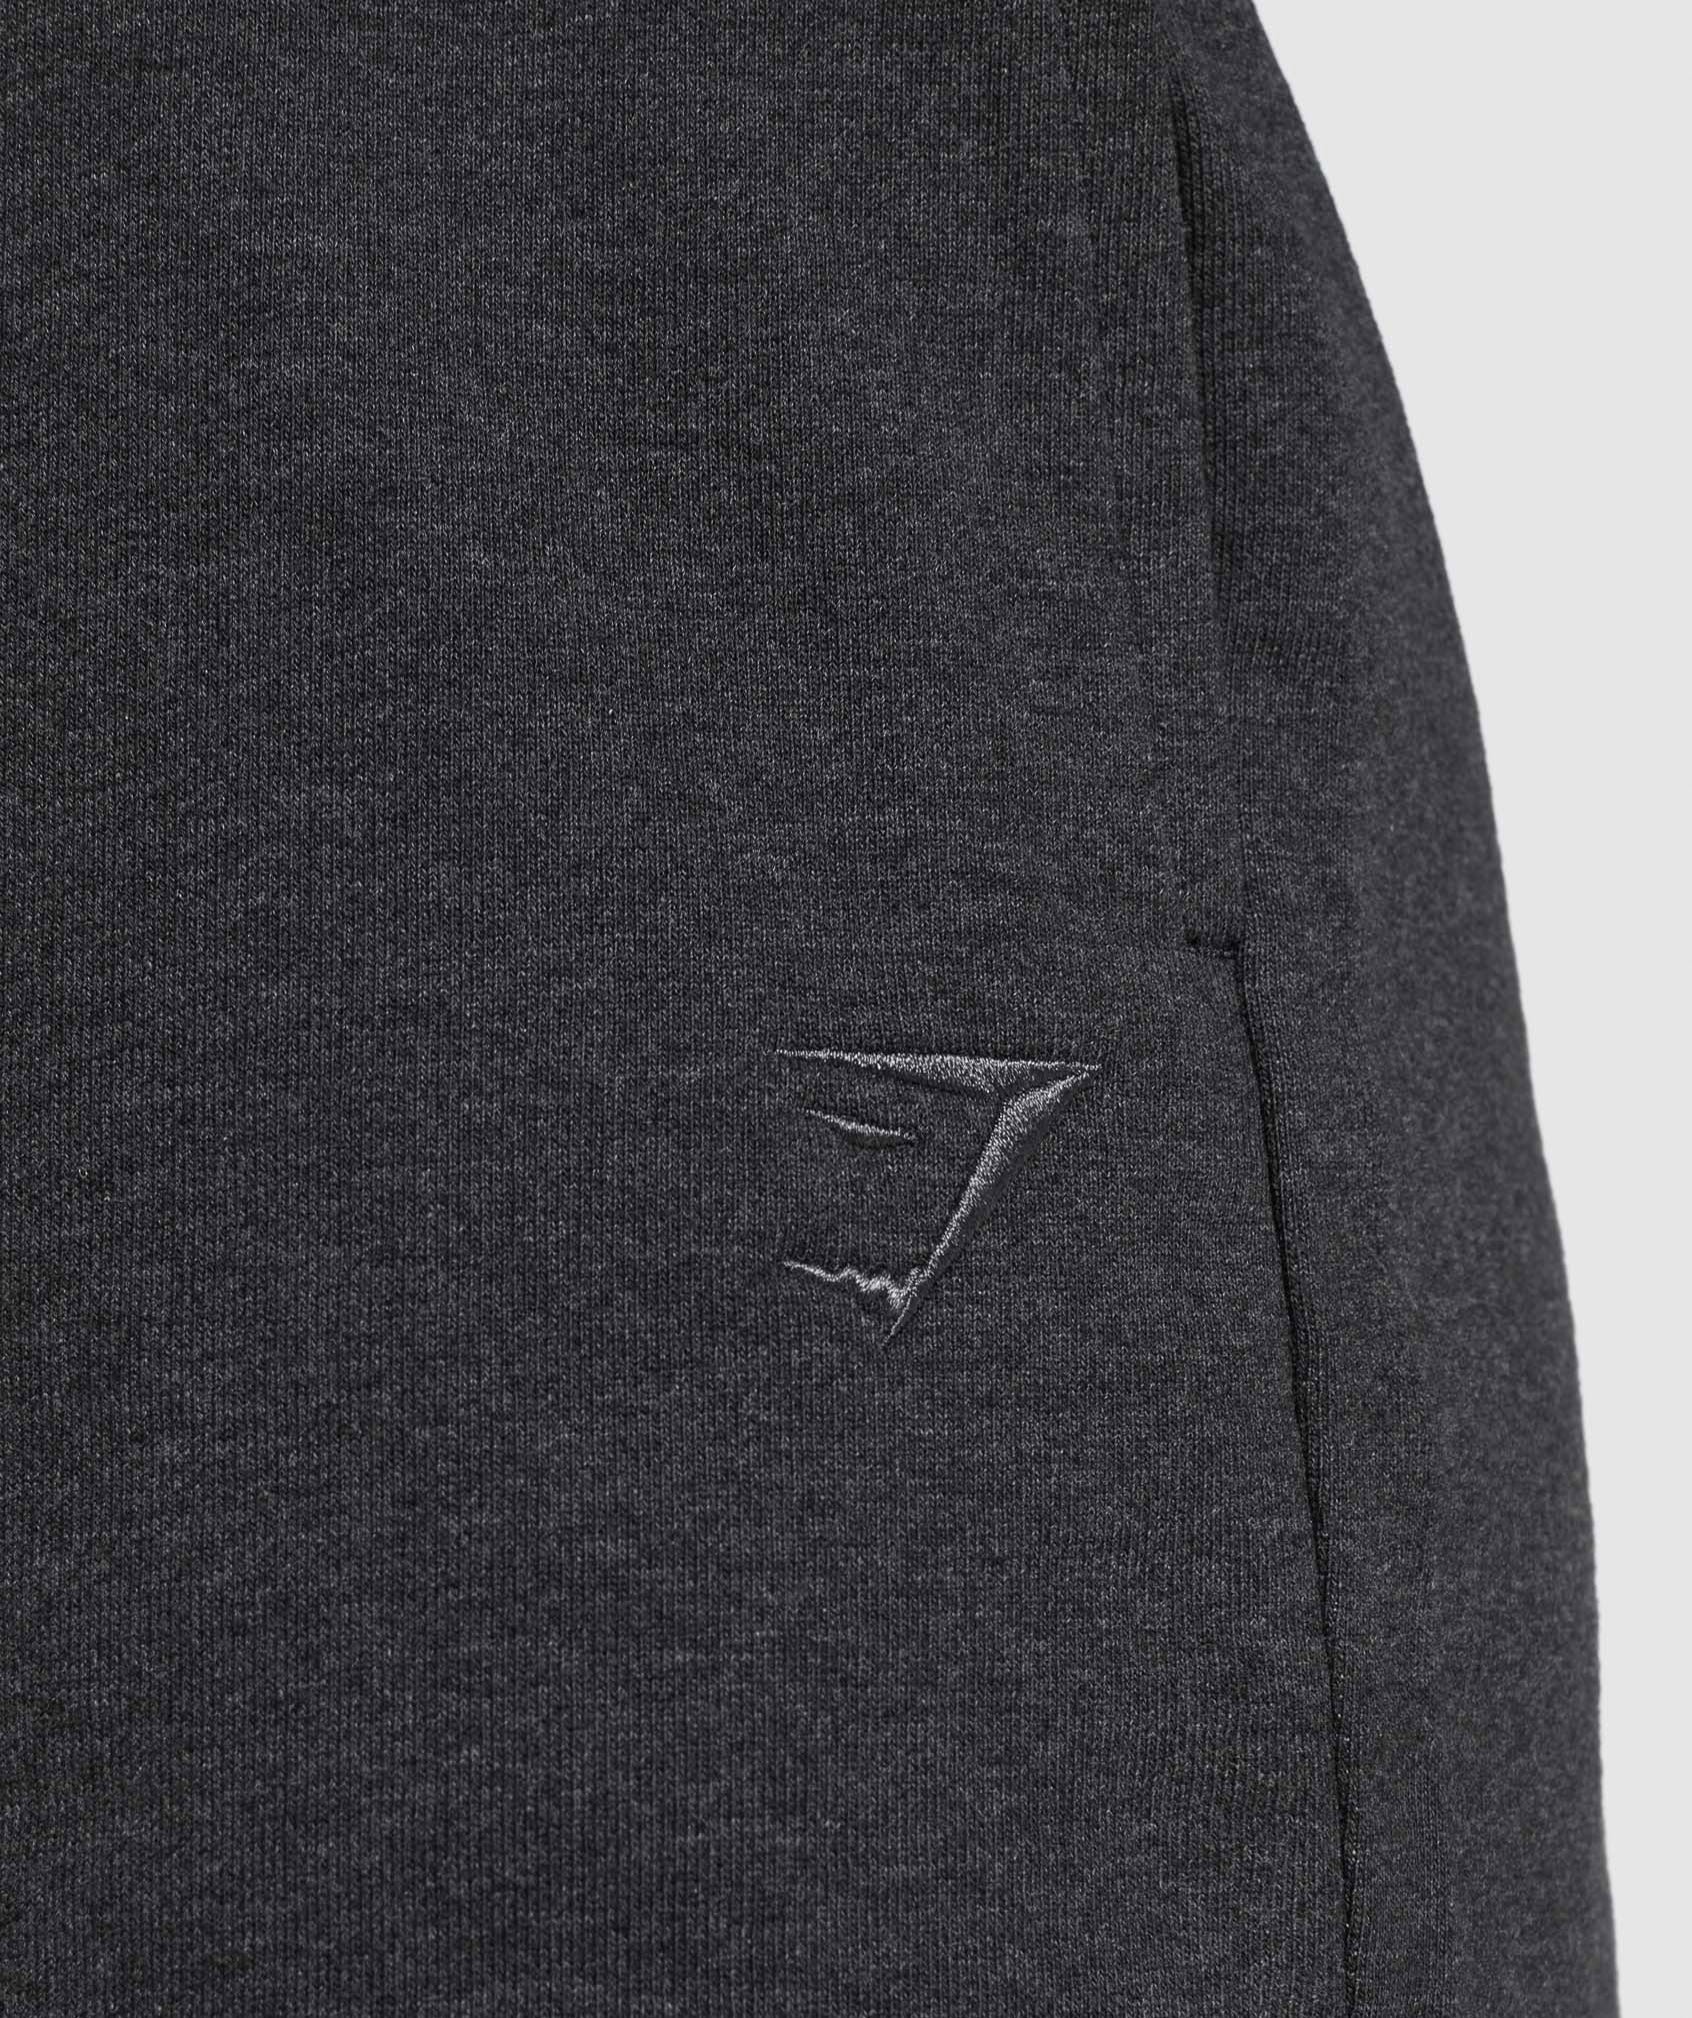 Gymshark Rest Day Sweats Cropped Pullover - Black Core Marl